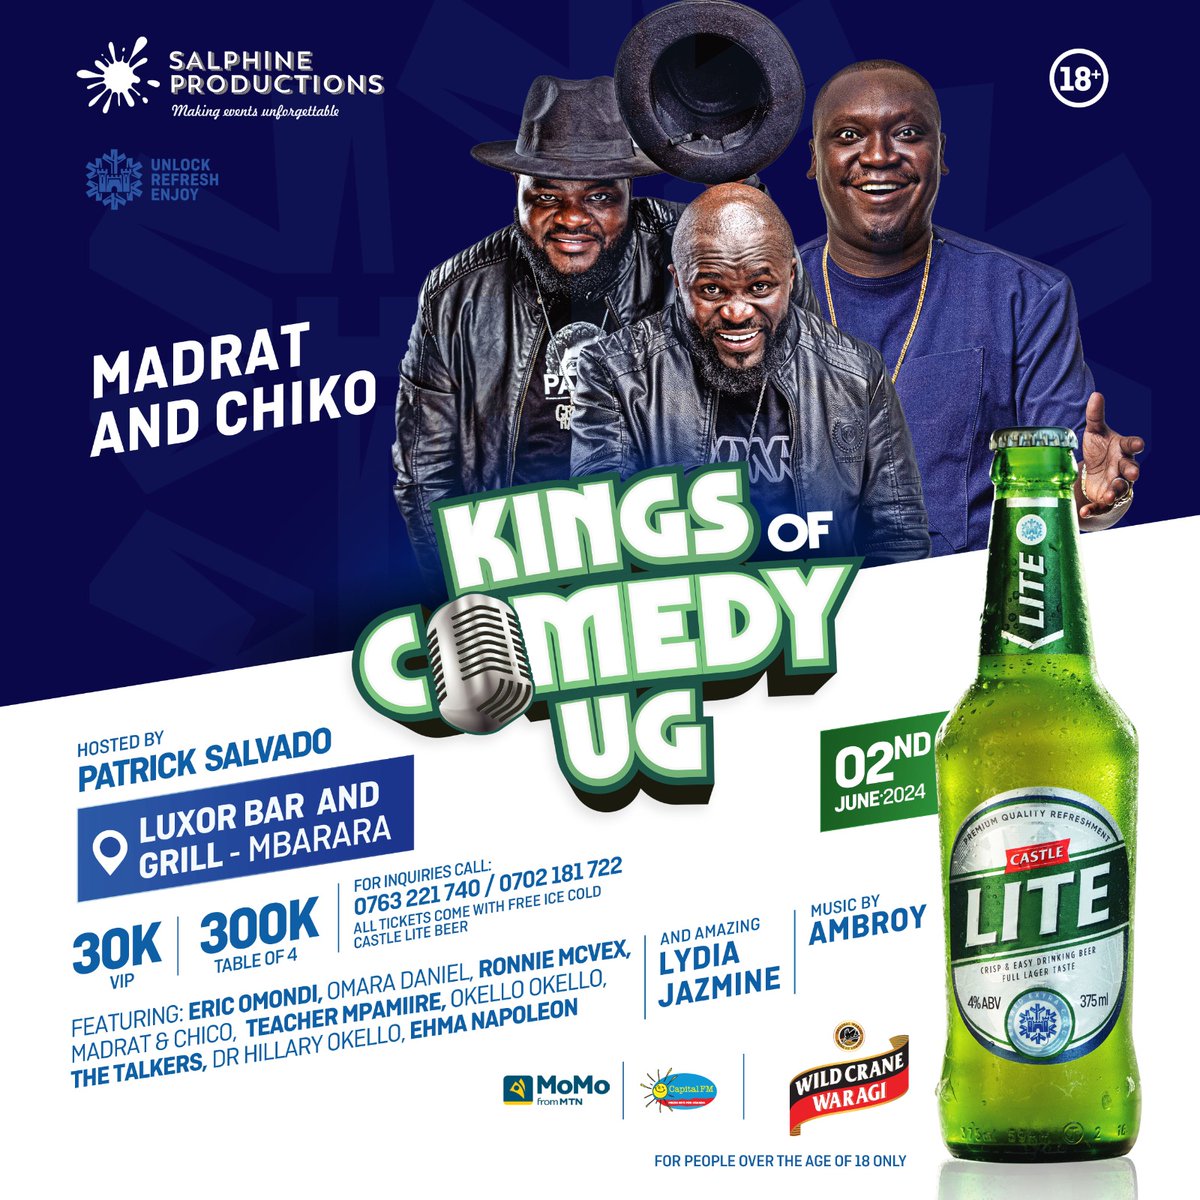 Here are some of the comedians performing at #KingsOfComedyUG. @TeacherMpamire1, @NapoleoneEm, @RonnieMcVex, and @chikoandmadrat At only 30k for VIP on Sunday for the #MbararaEdition.